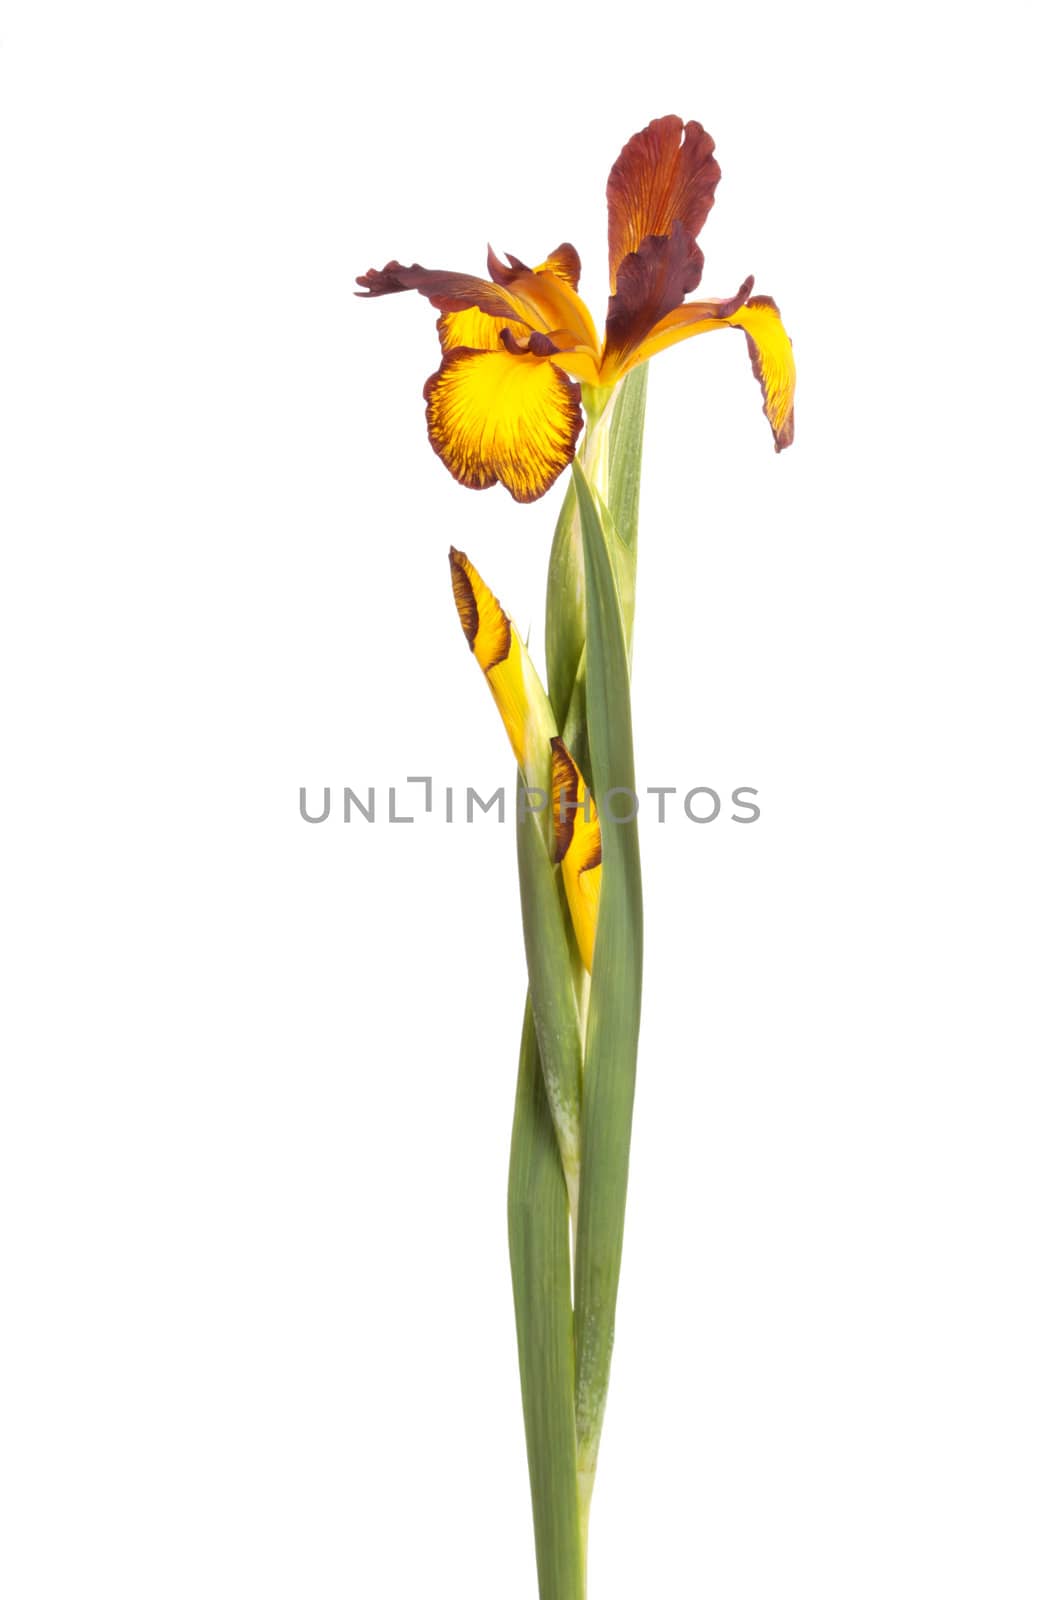 Stem and flowers of Spuria iris isolated on white by sgoodwin4813